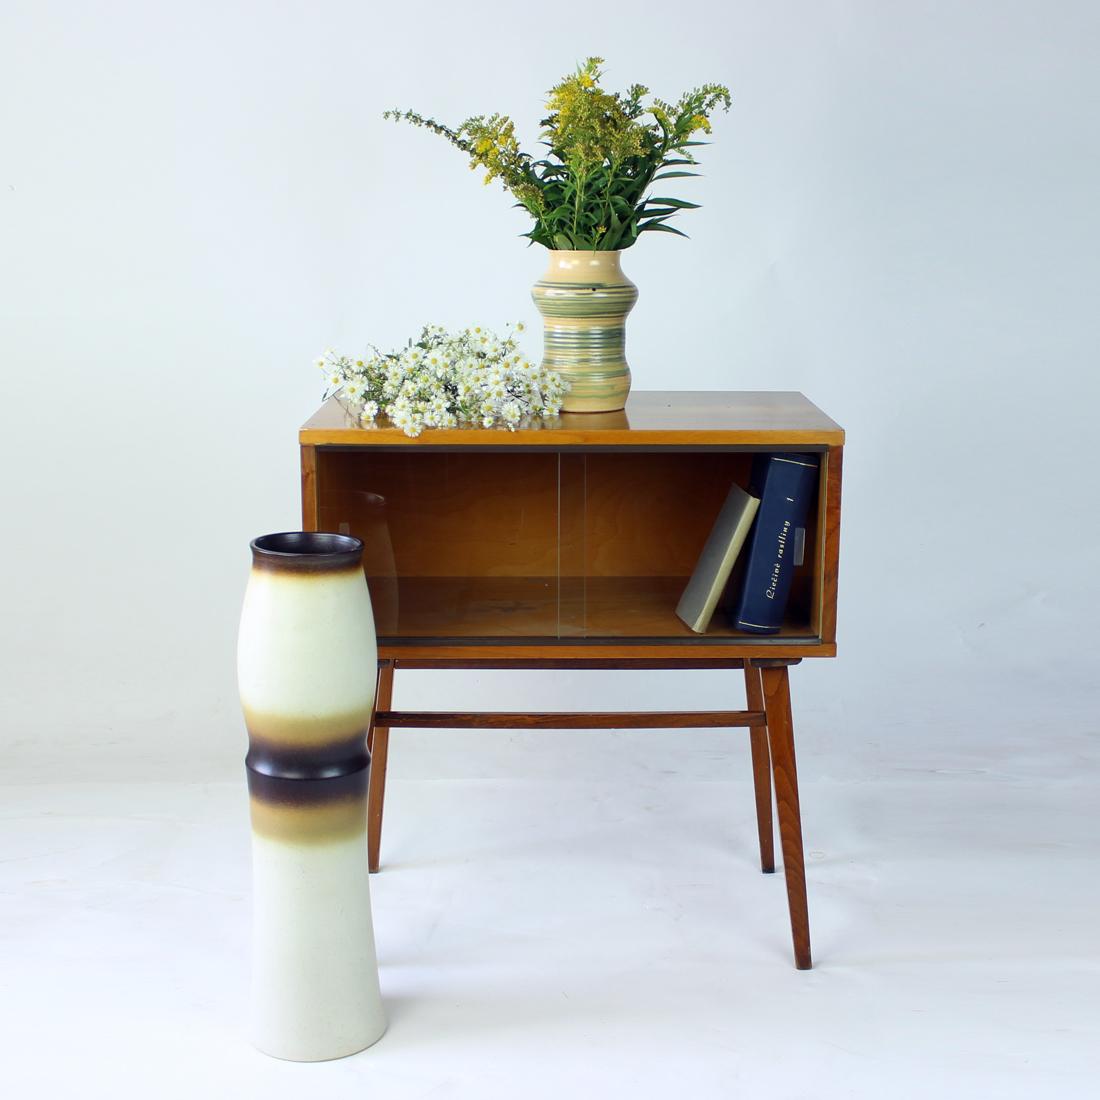 What a beast! This beautiful vintage vase is a definitely a stand out! It is hard to miss in any interior and hard not to love, too. Produced by Dittmar Urbach in 1960s, the original stamp is still visible in the bottom. The vase is made of ceramic